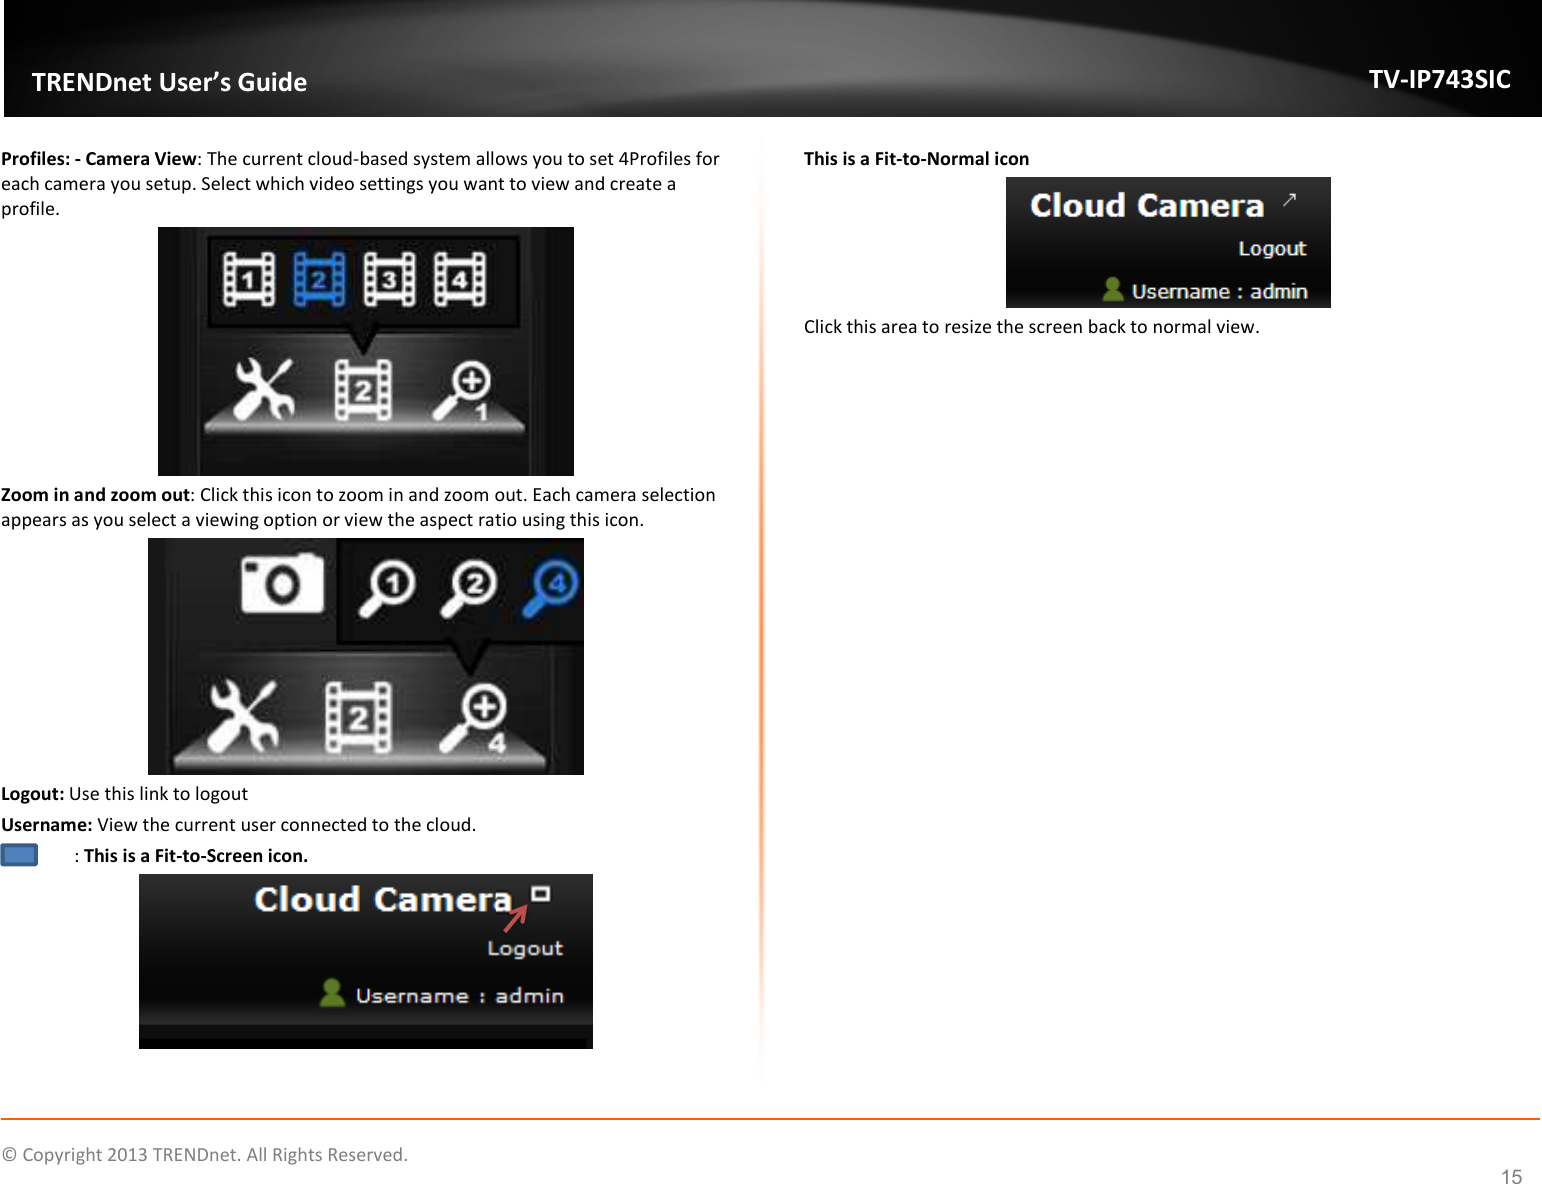    © Copyright 2013 TRENDnet. All Rights Reserved.   TRENDnet User’s Guide TV-IP743SIC 15 Profiles: - Camera View: The current cloud-based system allows you to set 4Profiles for each camera you setup. Select which video settings you want to view and create a profile.  Zoom in and zoom out: Click this icon to zoom in and zoom out. Each camera selection appears as you select a viewing option or view the aspect ratio using this icon.  Logout: Use this link to logout Username: View the current user connected to the cloud.   : This is a Fit-to-Screen icon.   This is a Fit-to-Normal icon  Click this area to resize the screen back to normal view.       